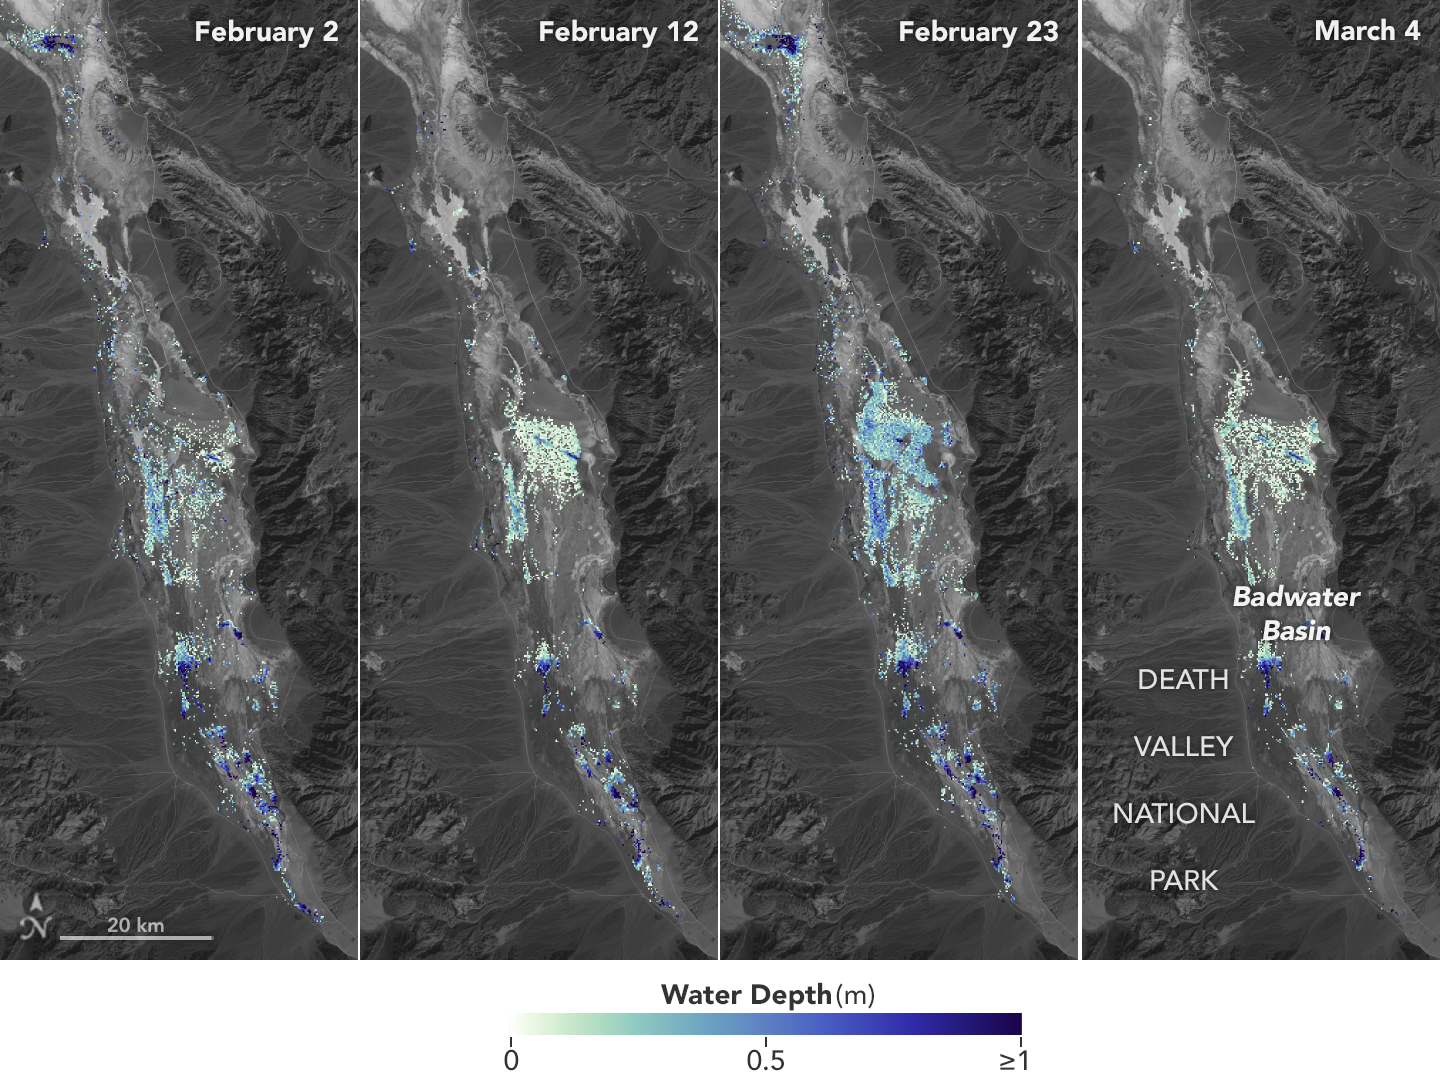 Four images of the same location are side by side. They are shown in false color with dry land being black. The areas with color show some of these changes in the lake’s water depth. Deeper areas are blue, and shallower areas are yellow.